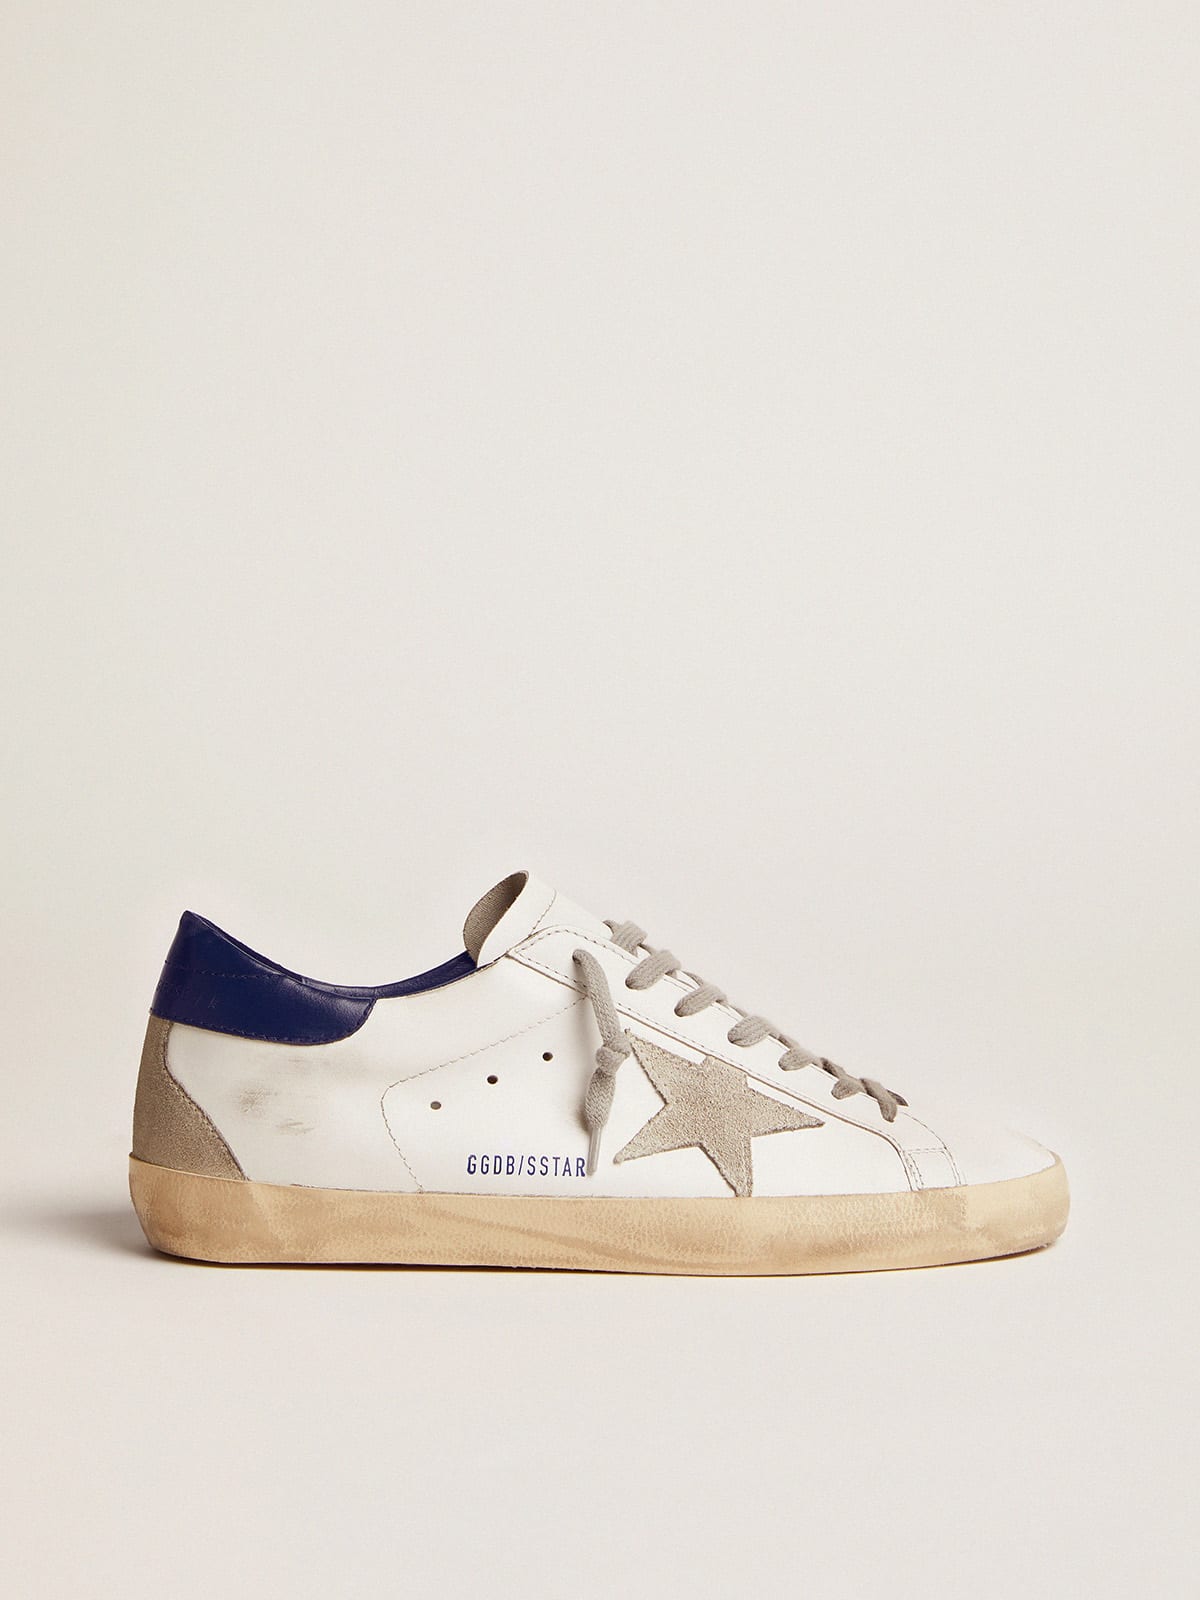 Men's Super-Star with suede star and blue heel tab | Golden Goose